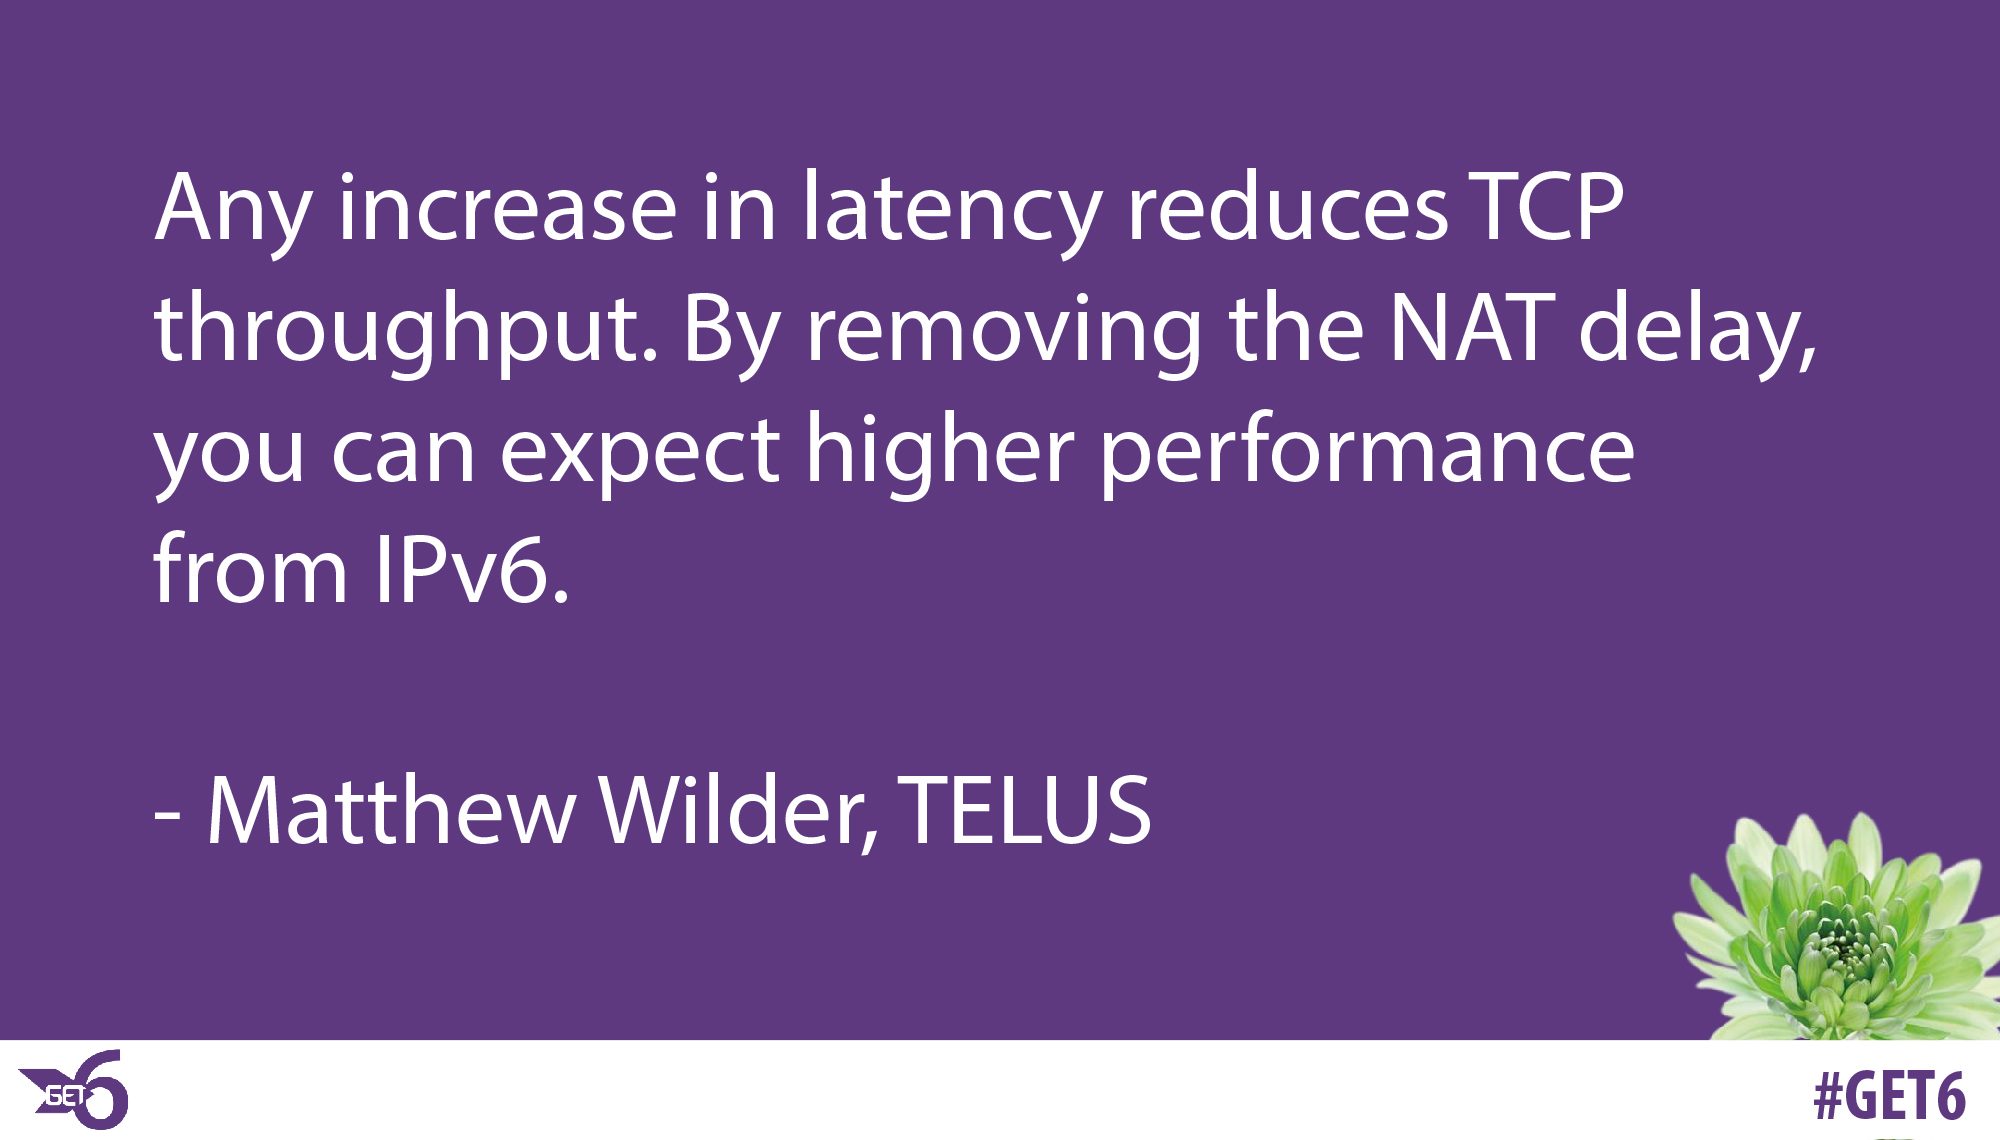 &ldquo;any increase in latency reduces TCP throughput. By removing the NAT delay, you can expect higher performance from IPv6.&rdquo;